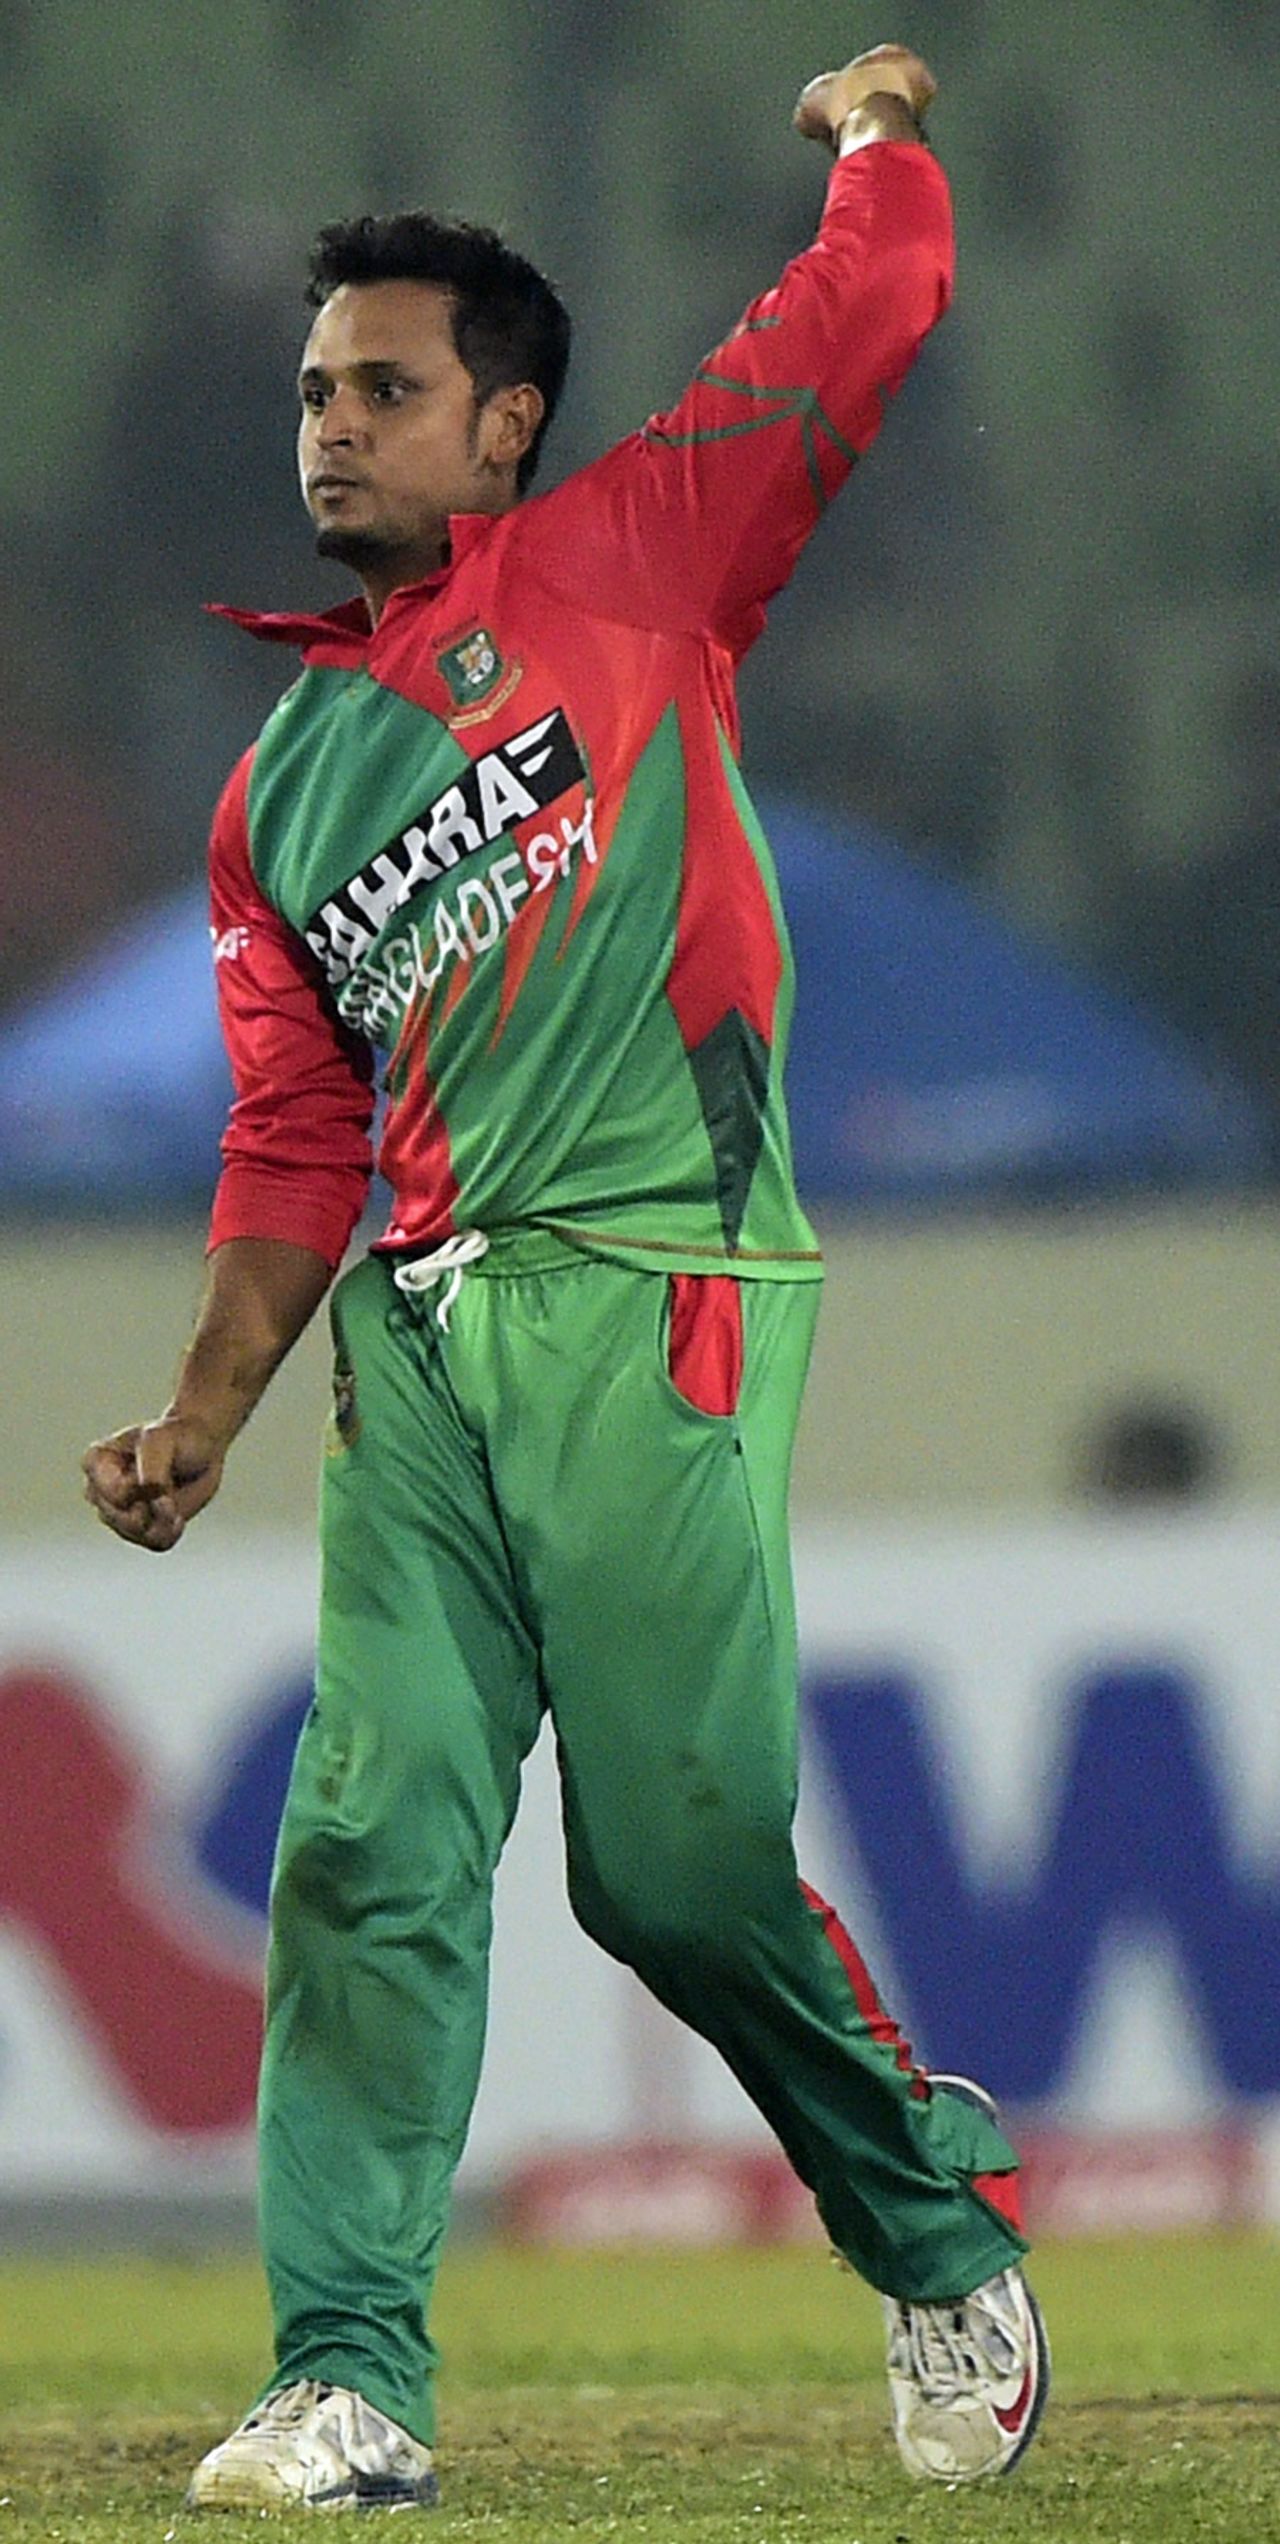 Left-arm spinner Arafat Sunny is thrilled after taking a wicket, Bangladesh v Zimbabwe, 3rd ODI, Mirpur, November 26, 2014